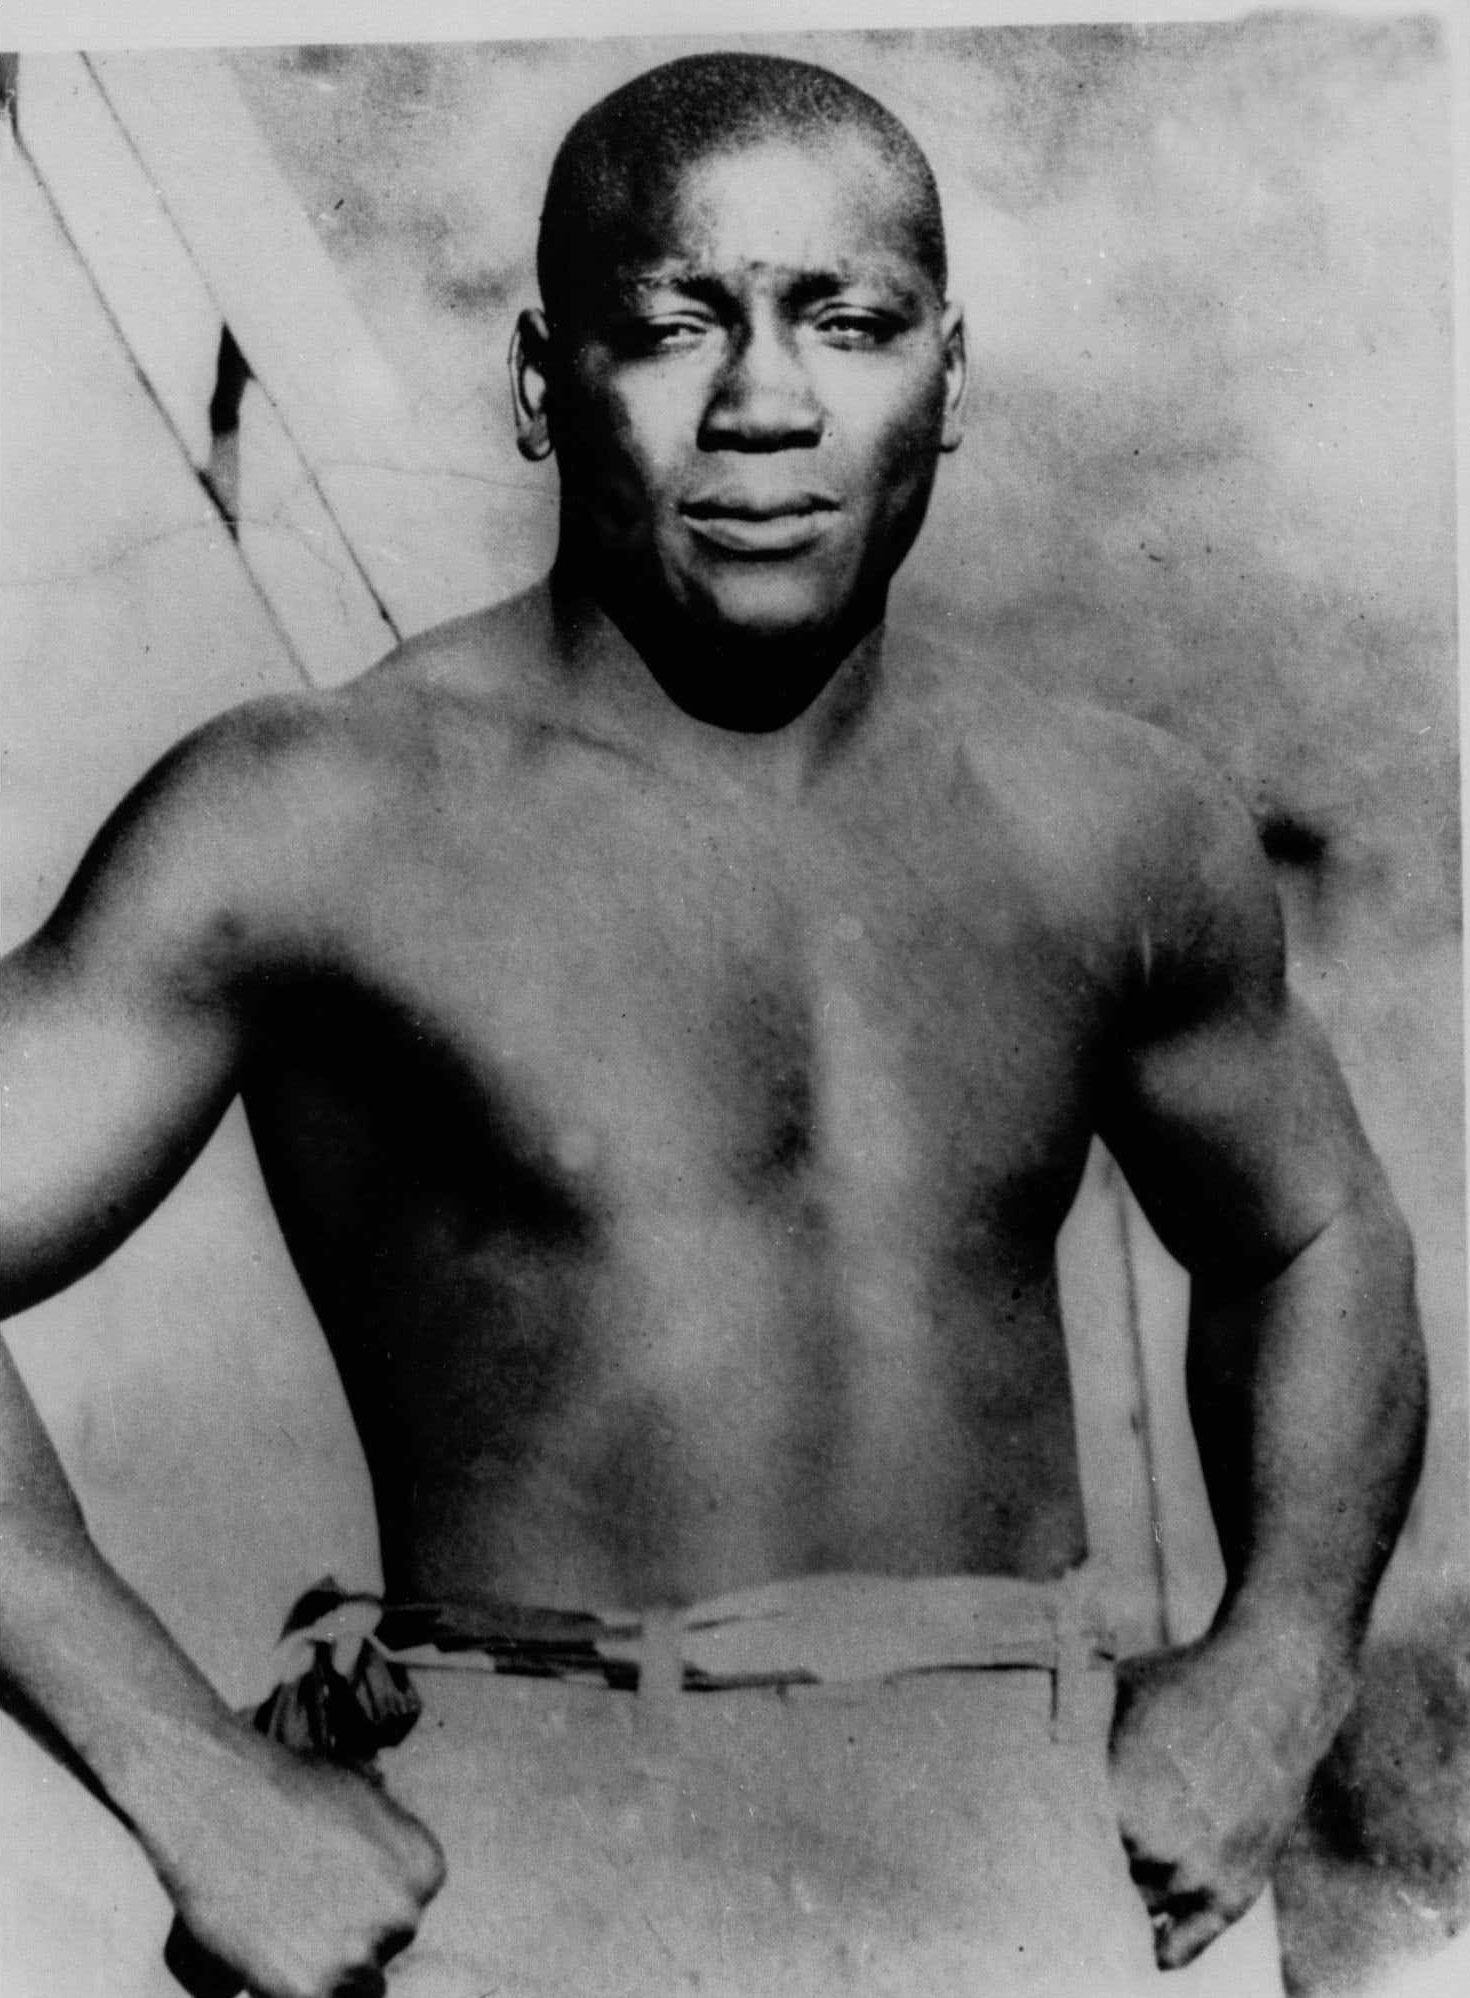 Jack Johnson relative says Trump considering pardon of boxer to 'win over black people'